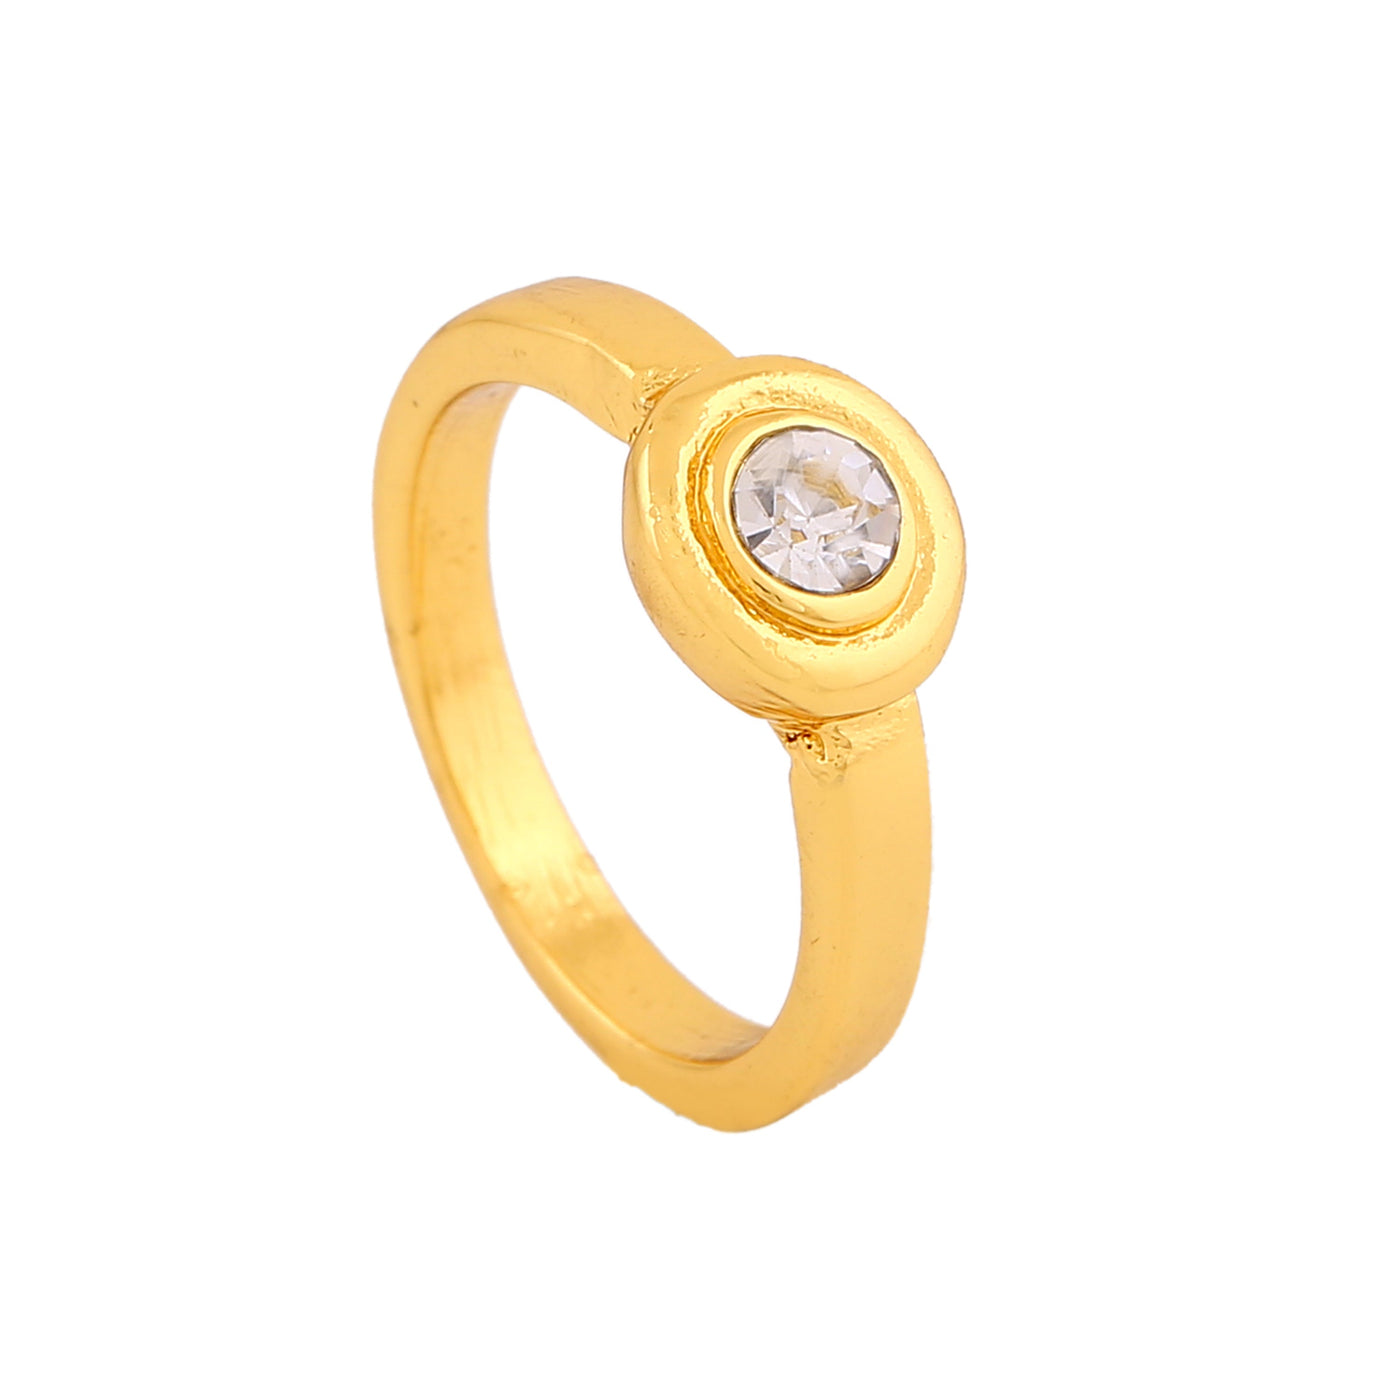 Estele Gold Plated Solitaire Finger Ring with Crystals for Women